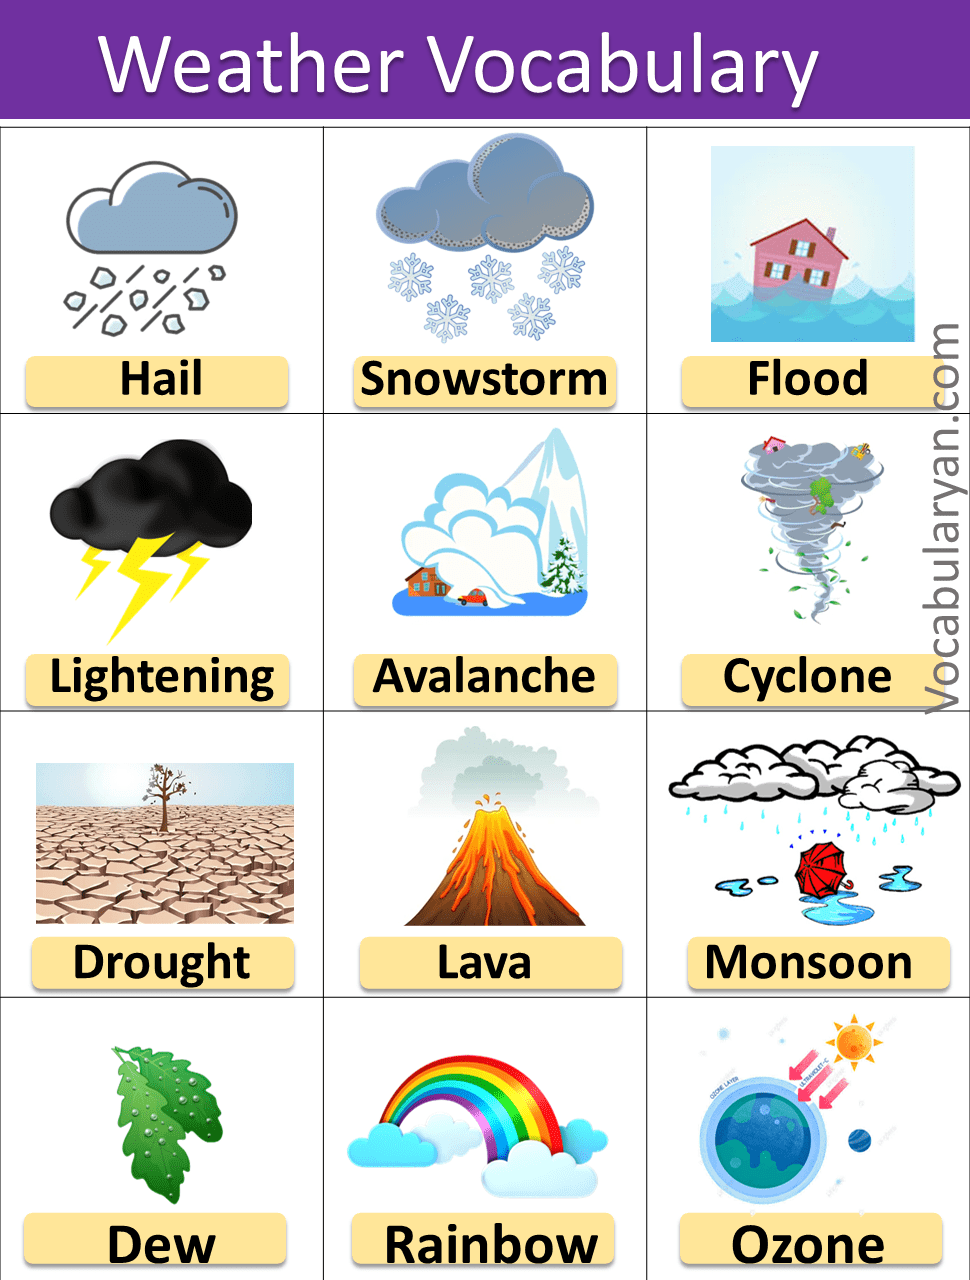 Weather and Climate Vocabulary in English | Vocabularyan